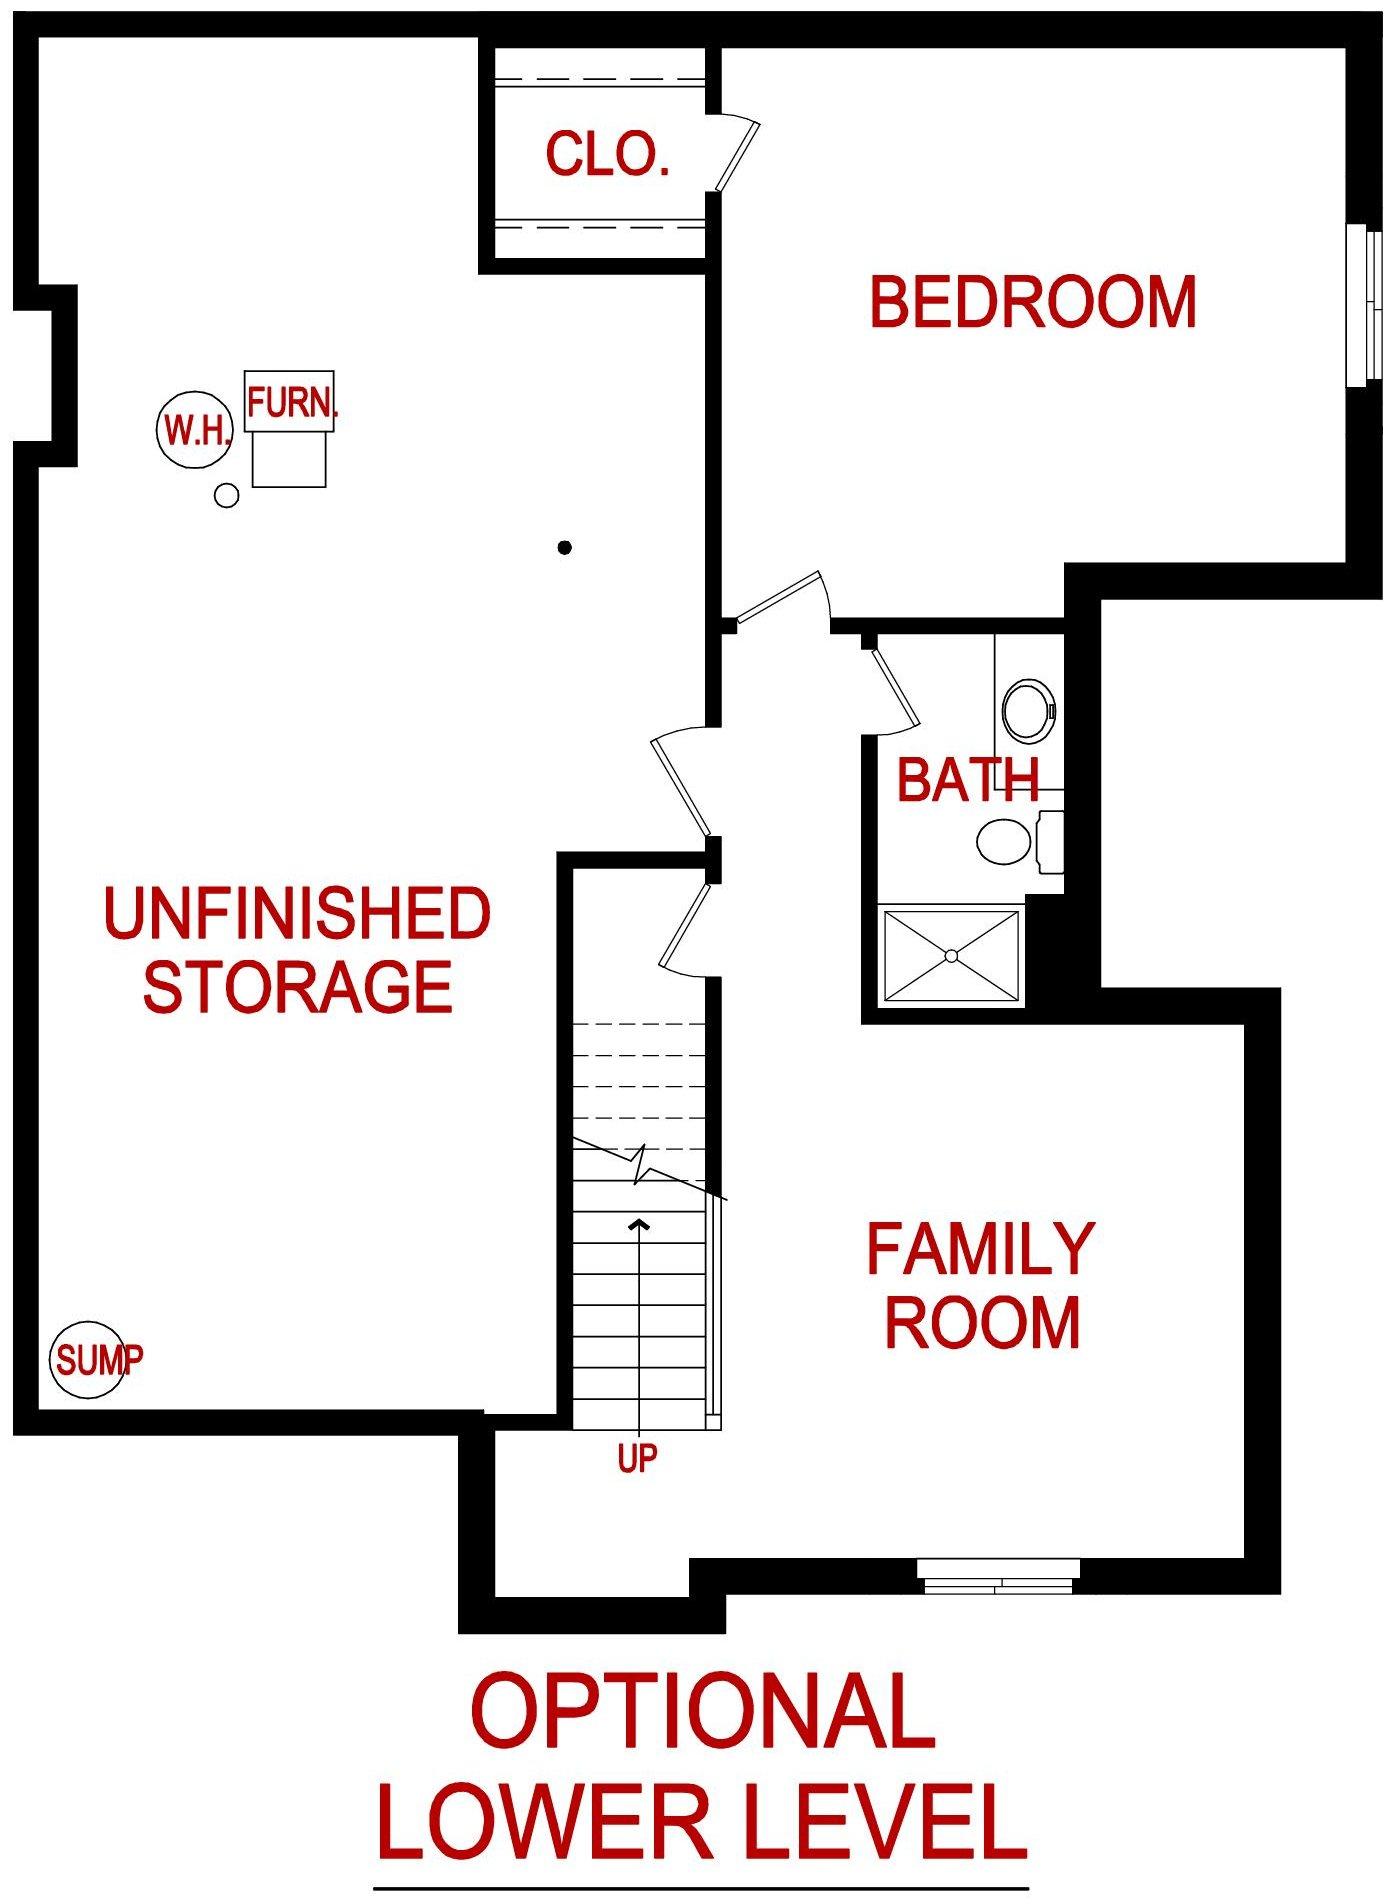 Optional lower level floor plan of a minor model from Lambie custom Homes